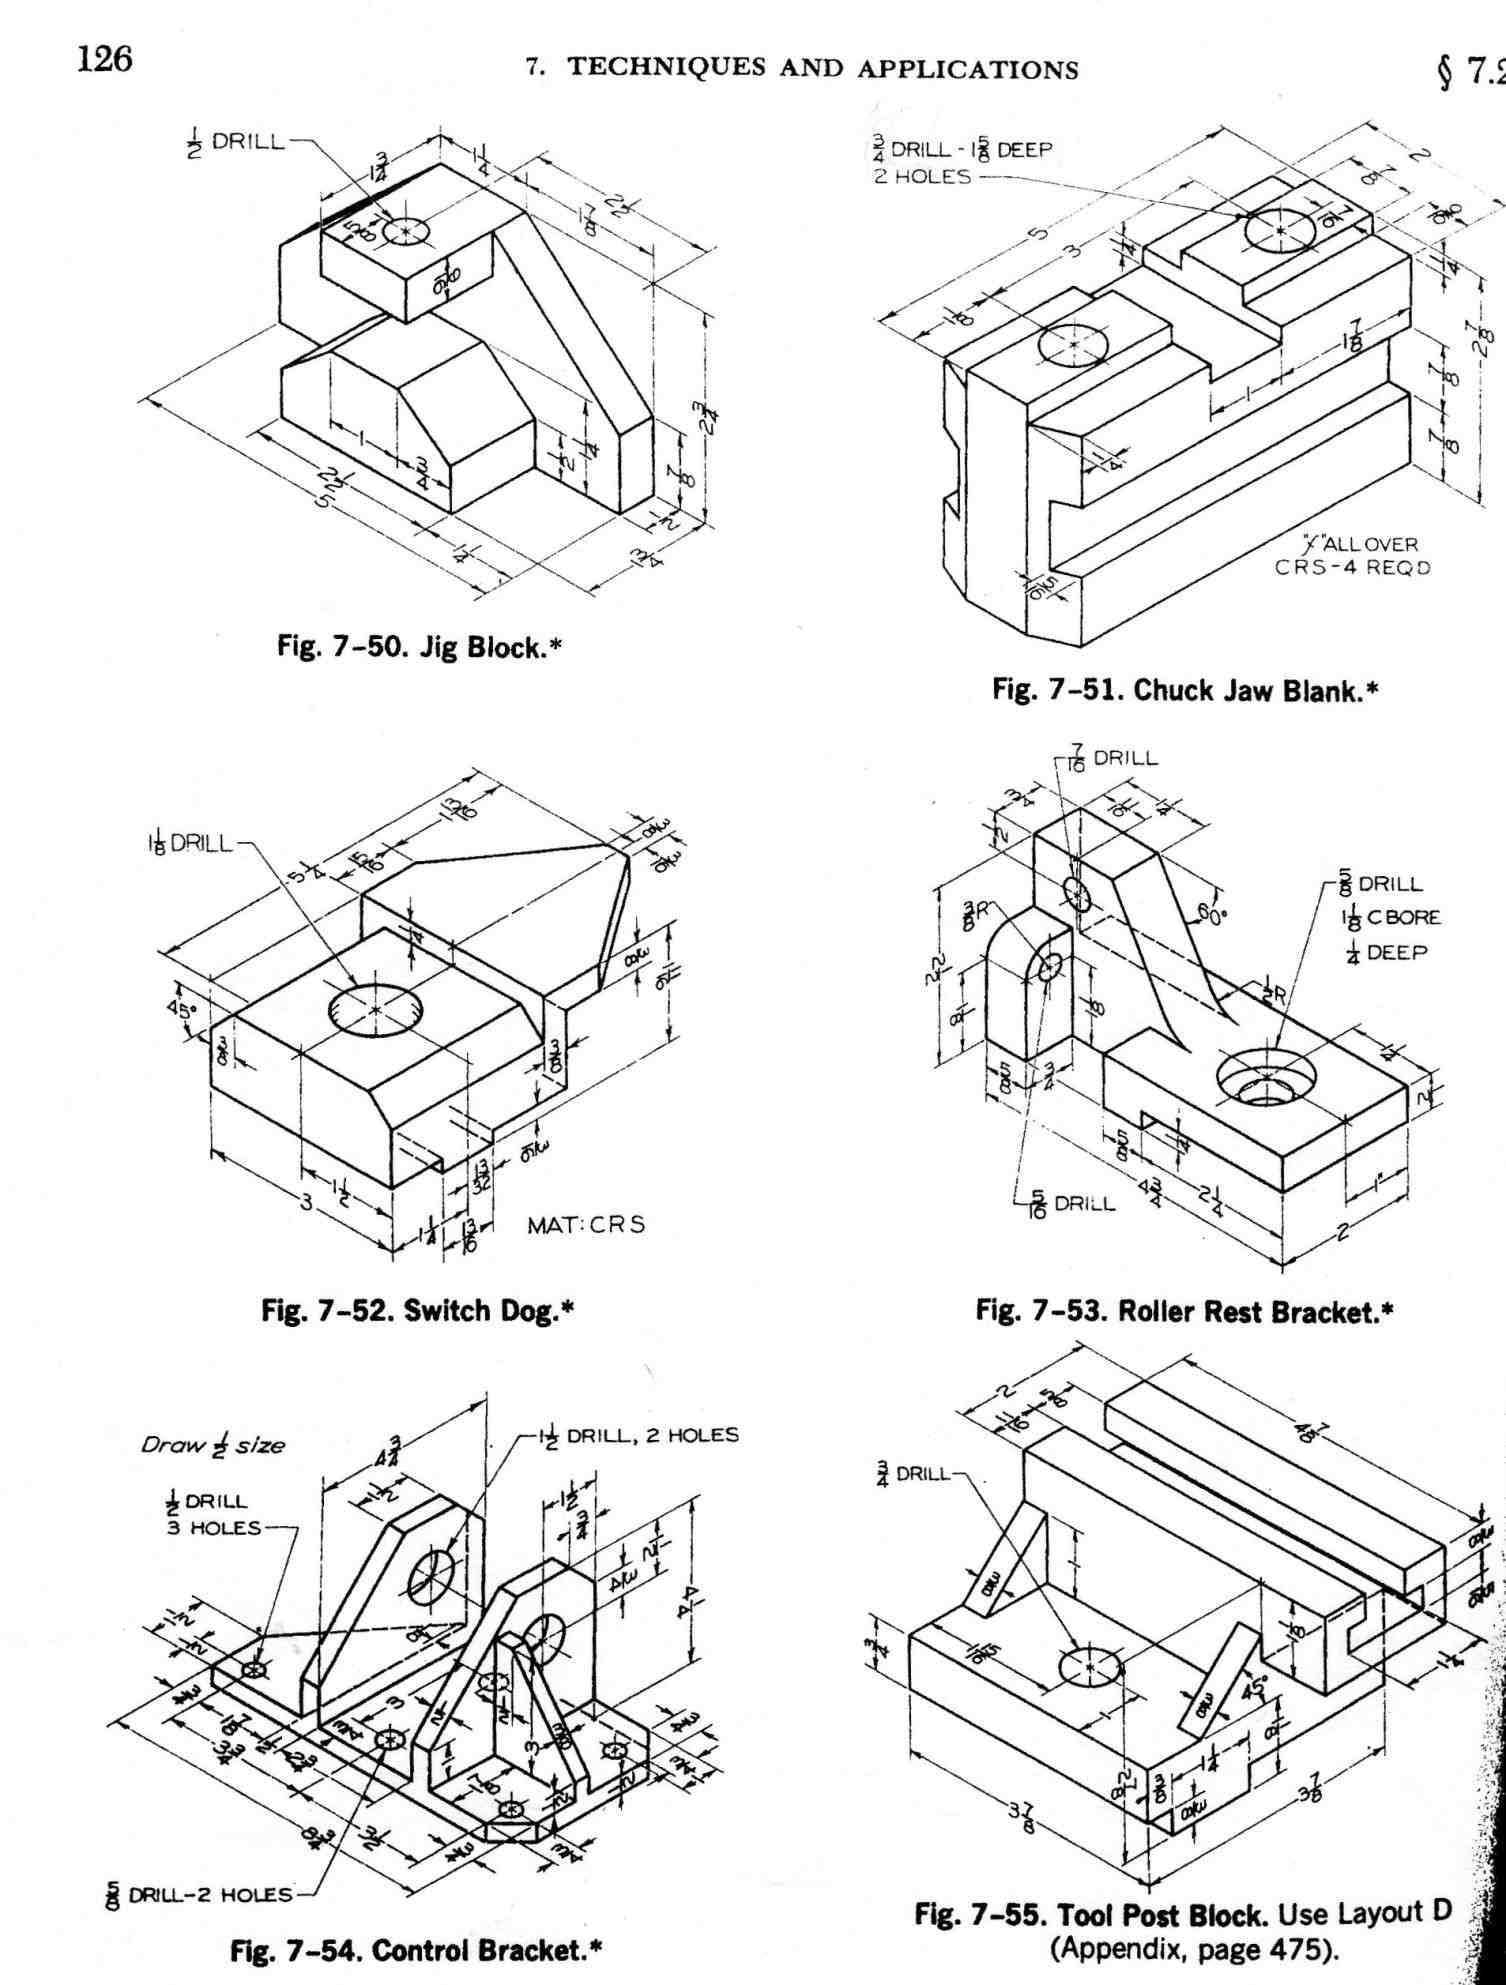 how to read an isometric drawing